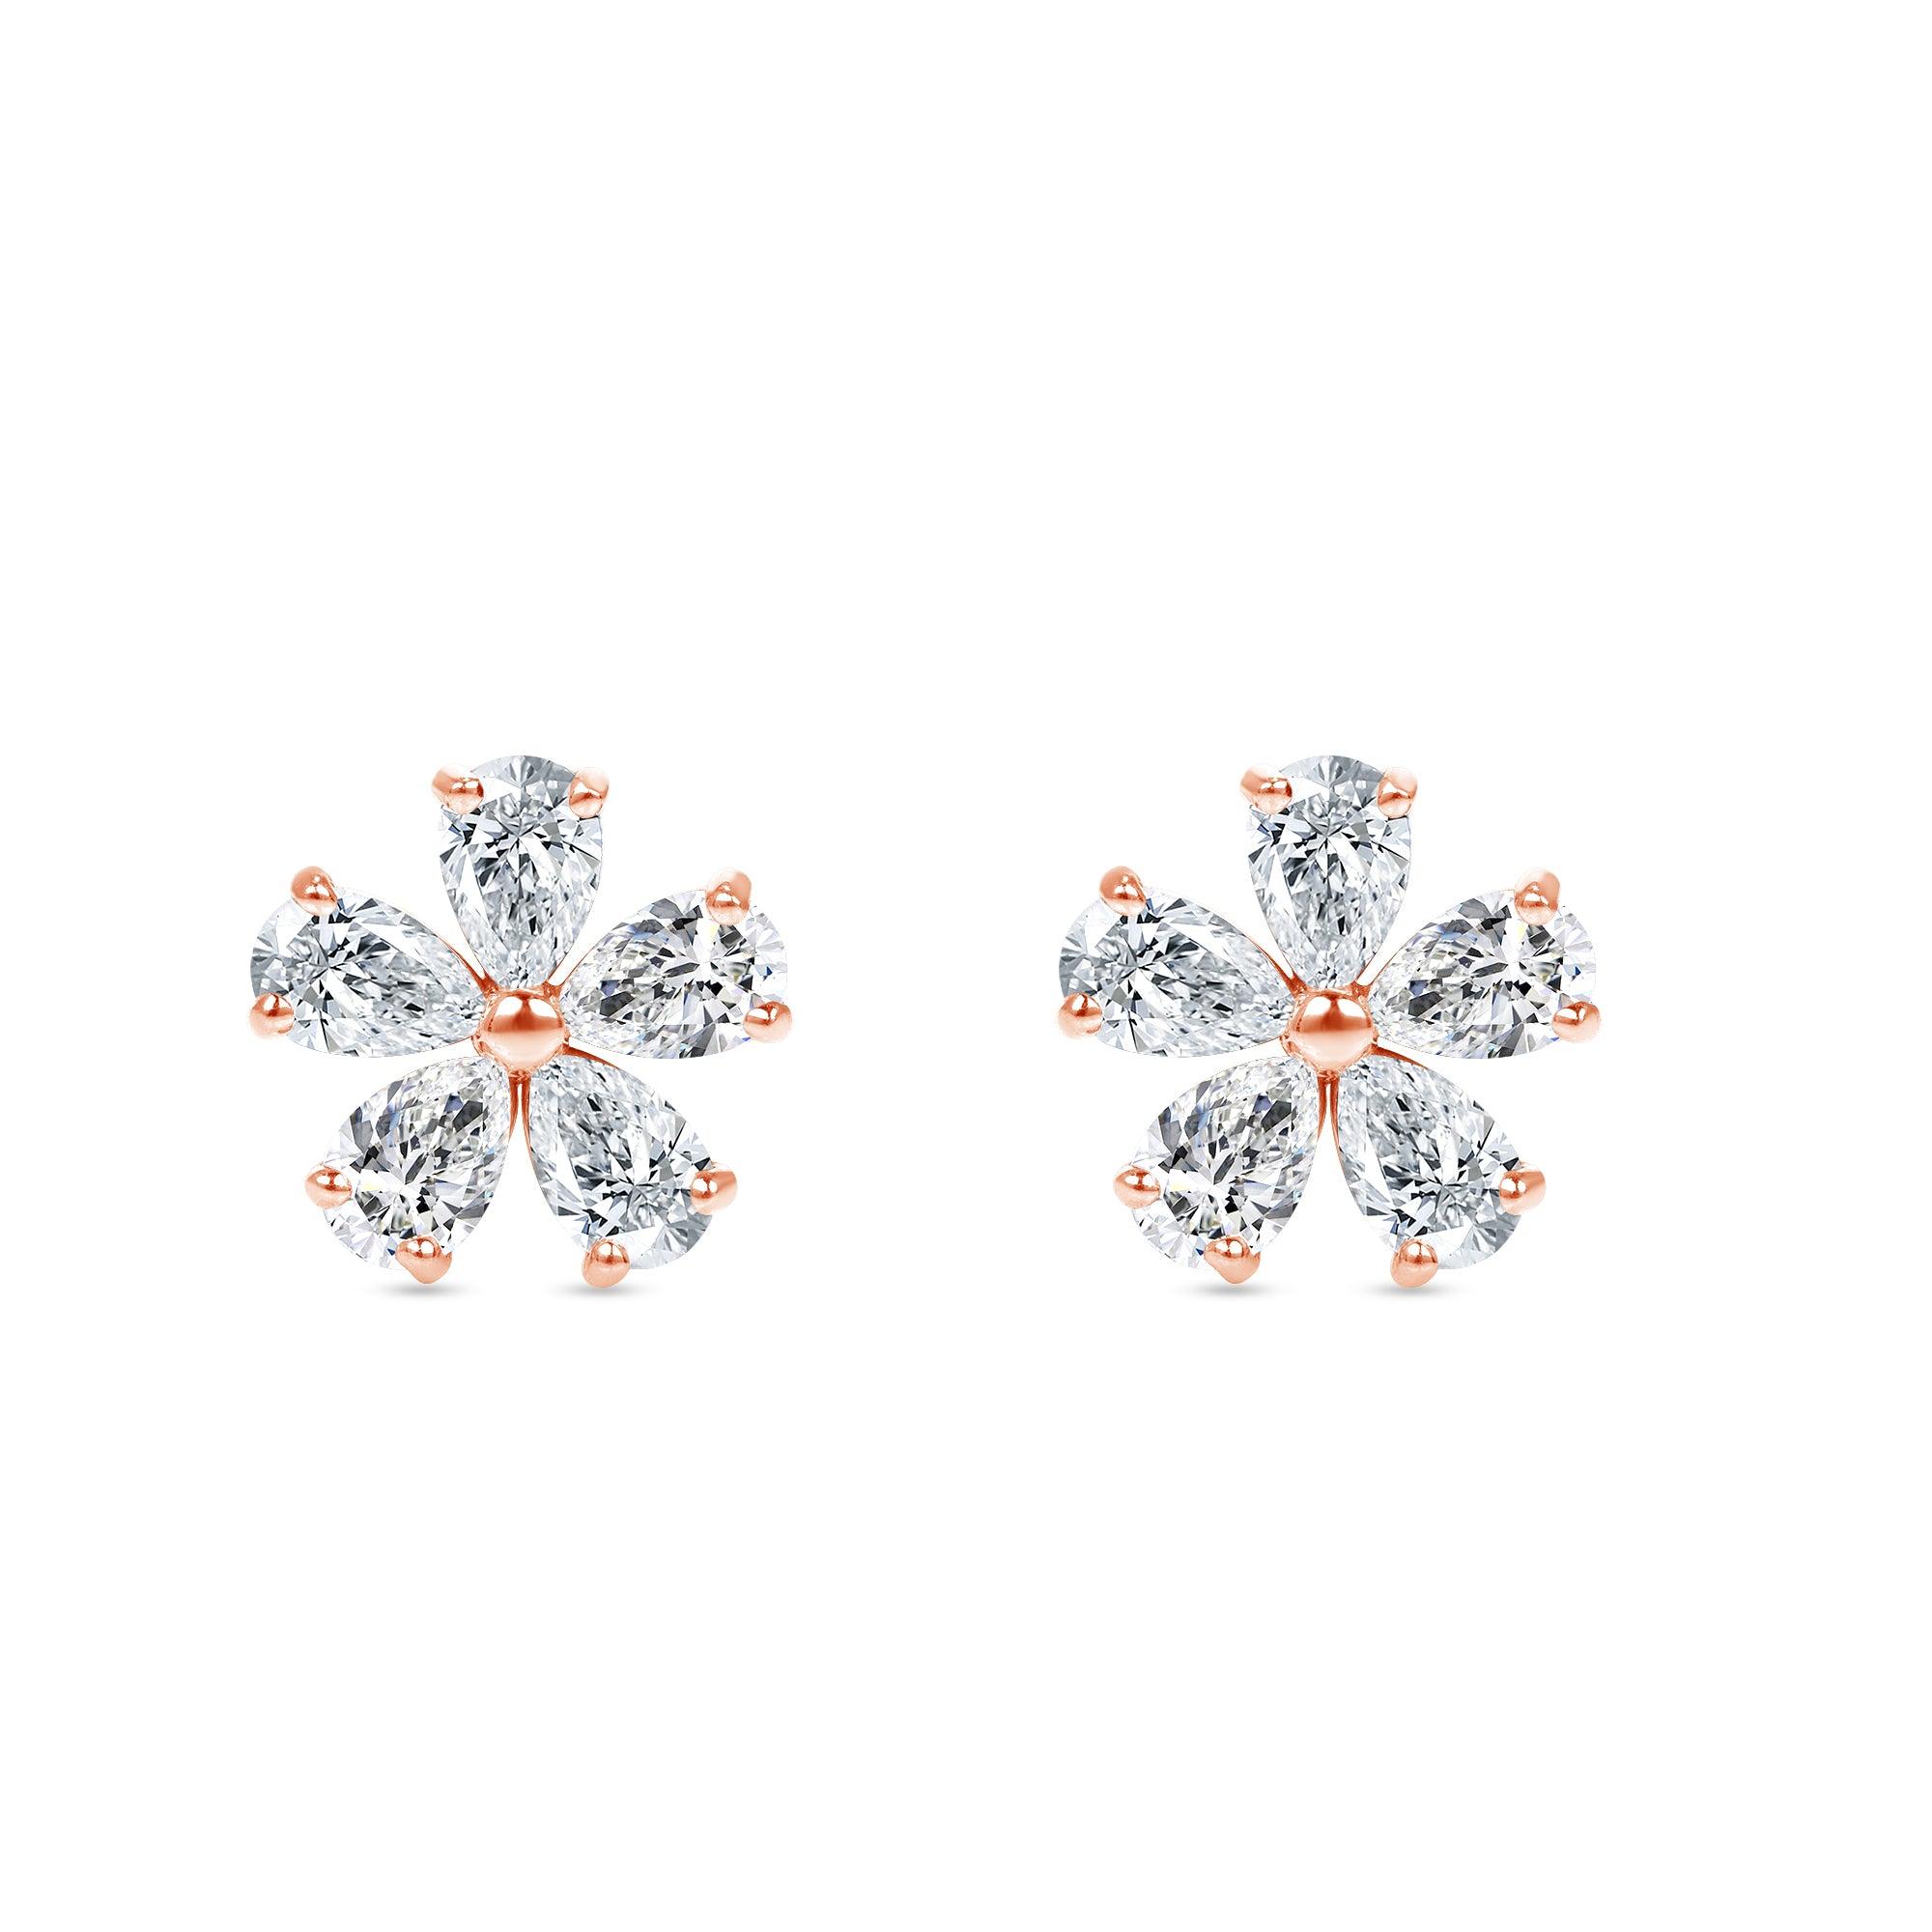 2 Ct Rose Gold Flower Earrings with Pear Shaped Diamonds